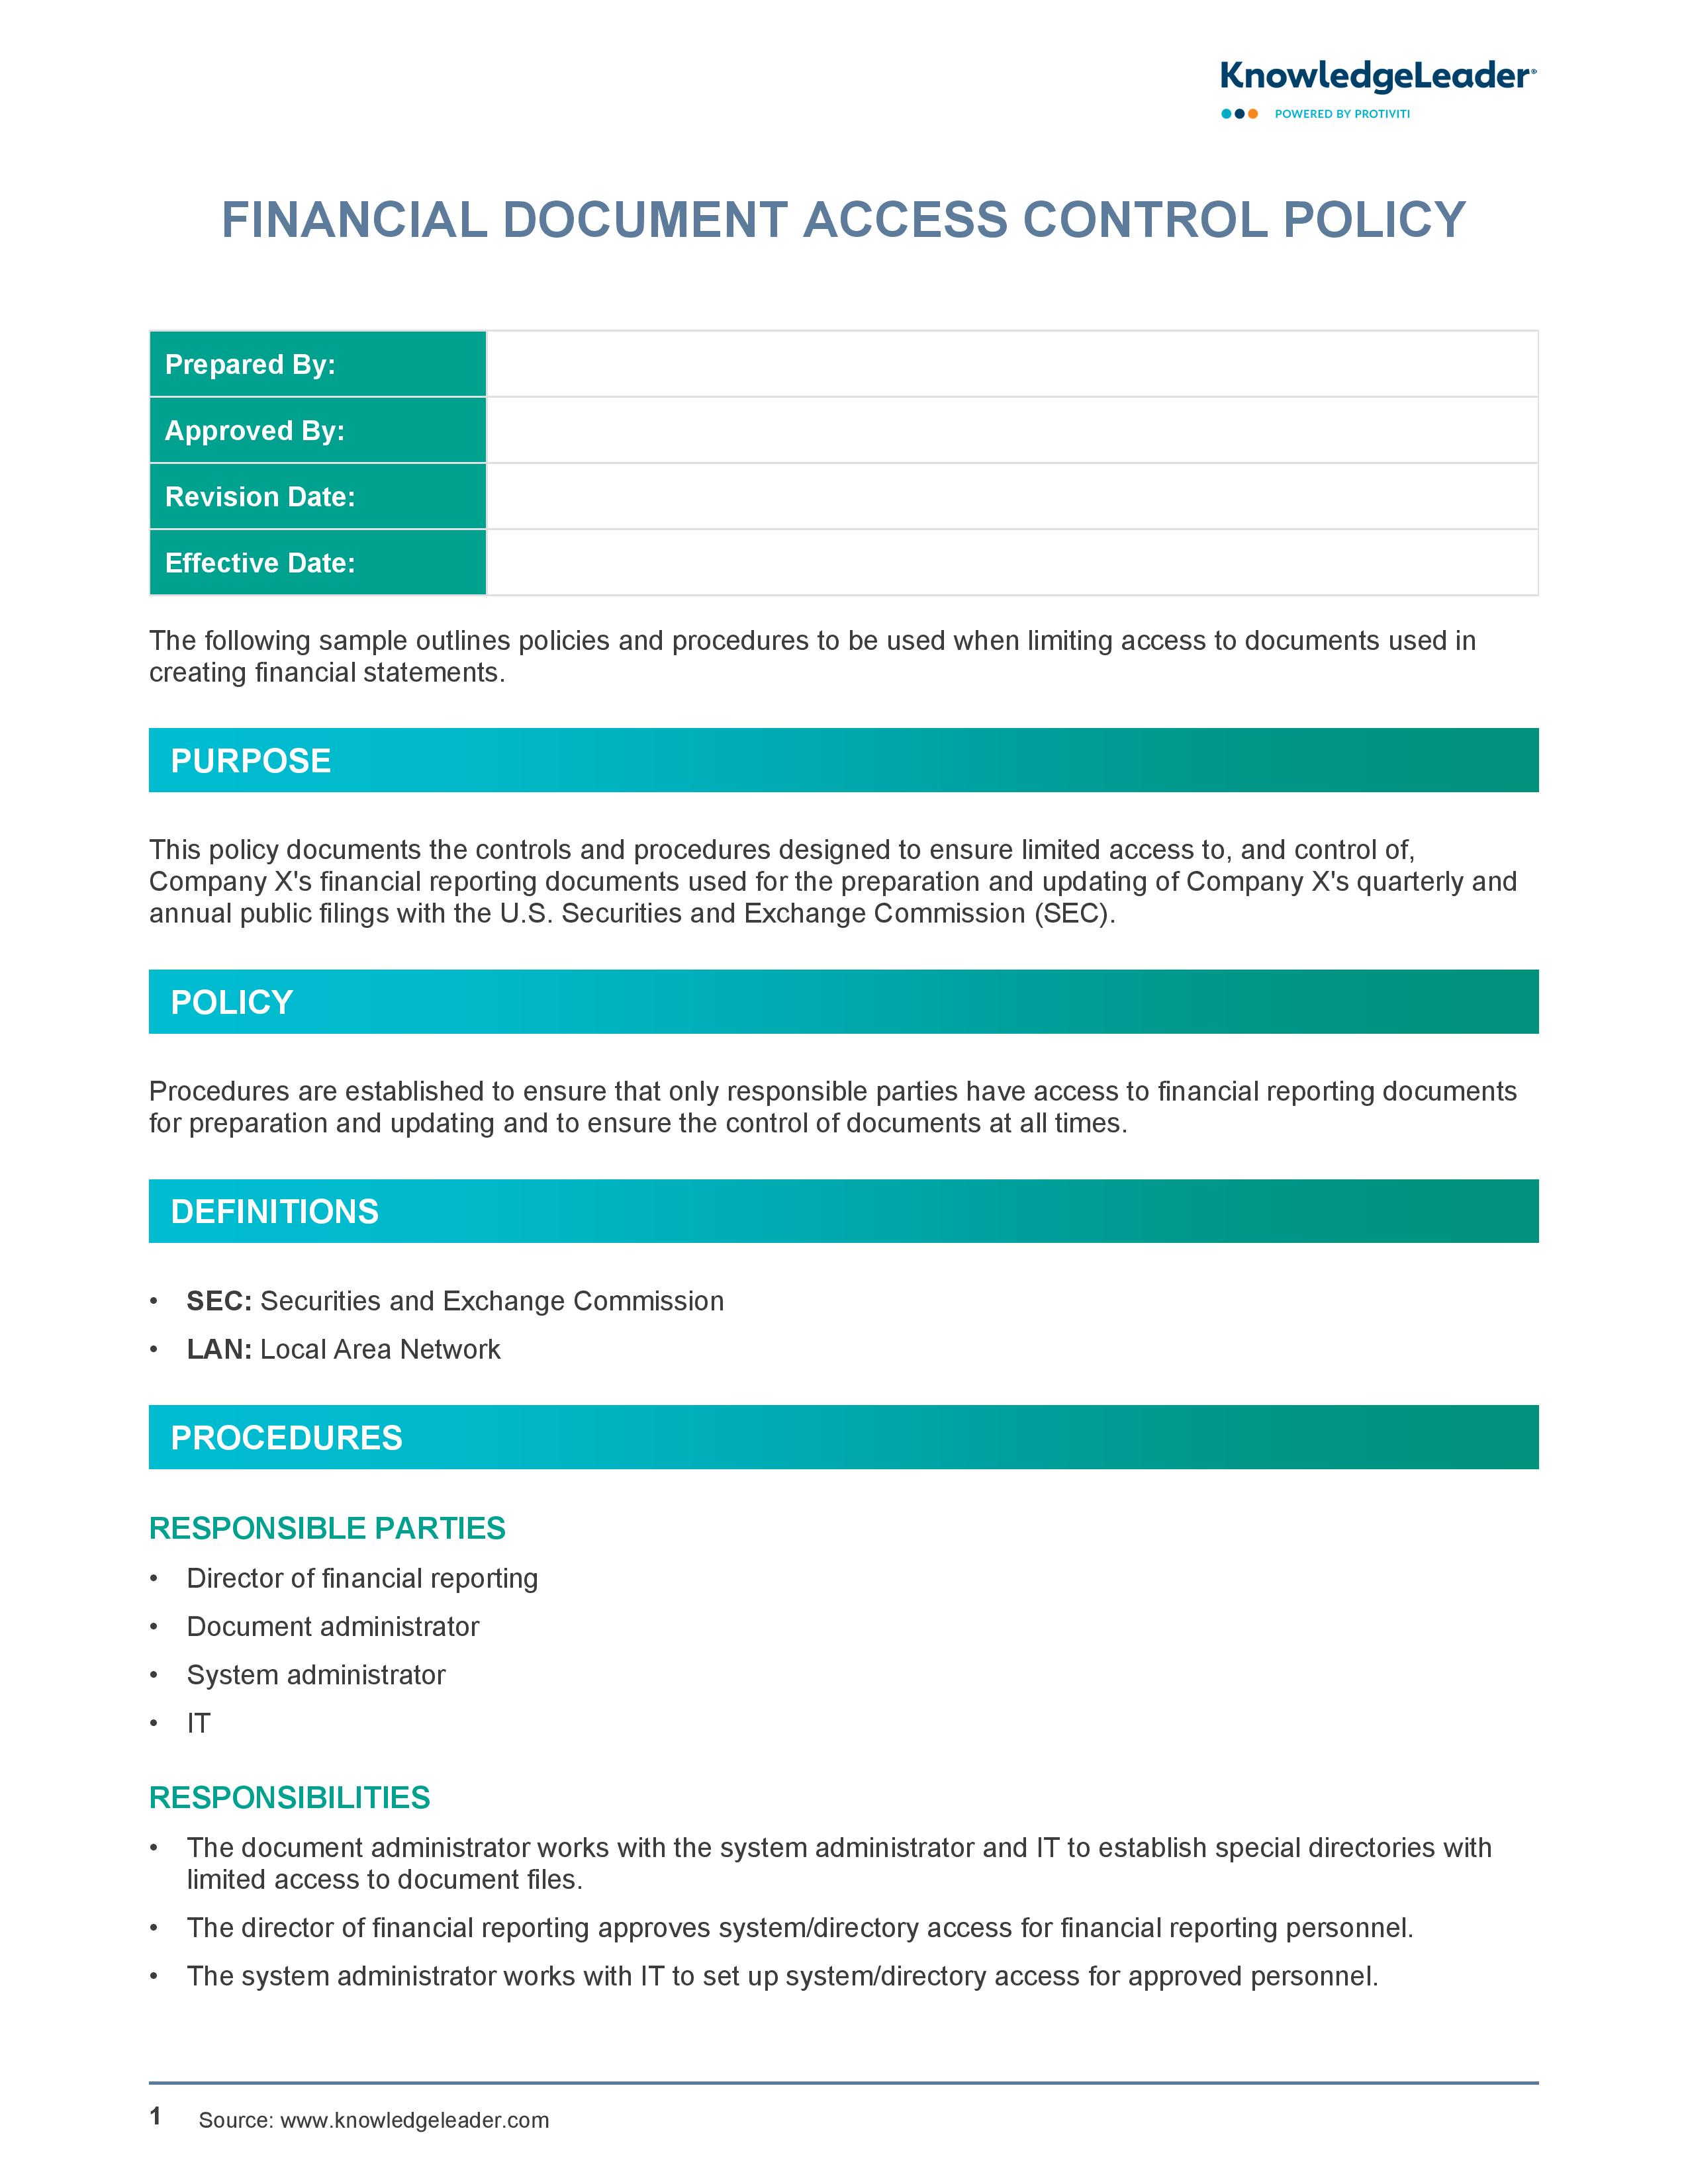 Screenshot of the first page of Financial Document Access Control Policy